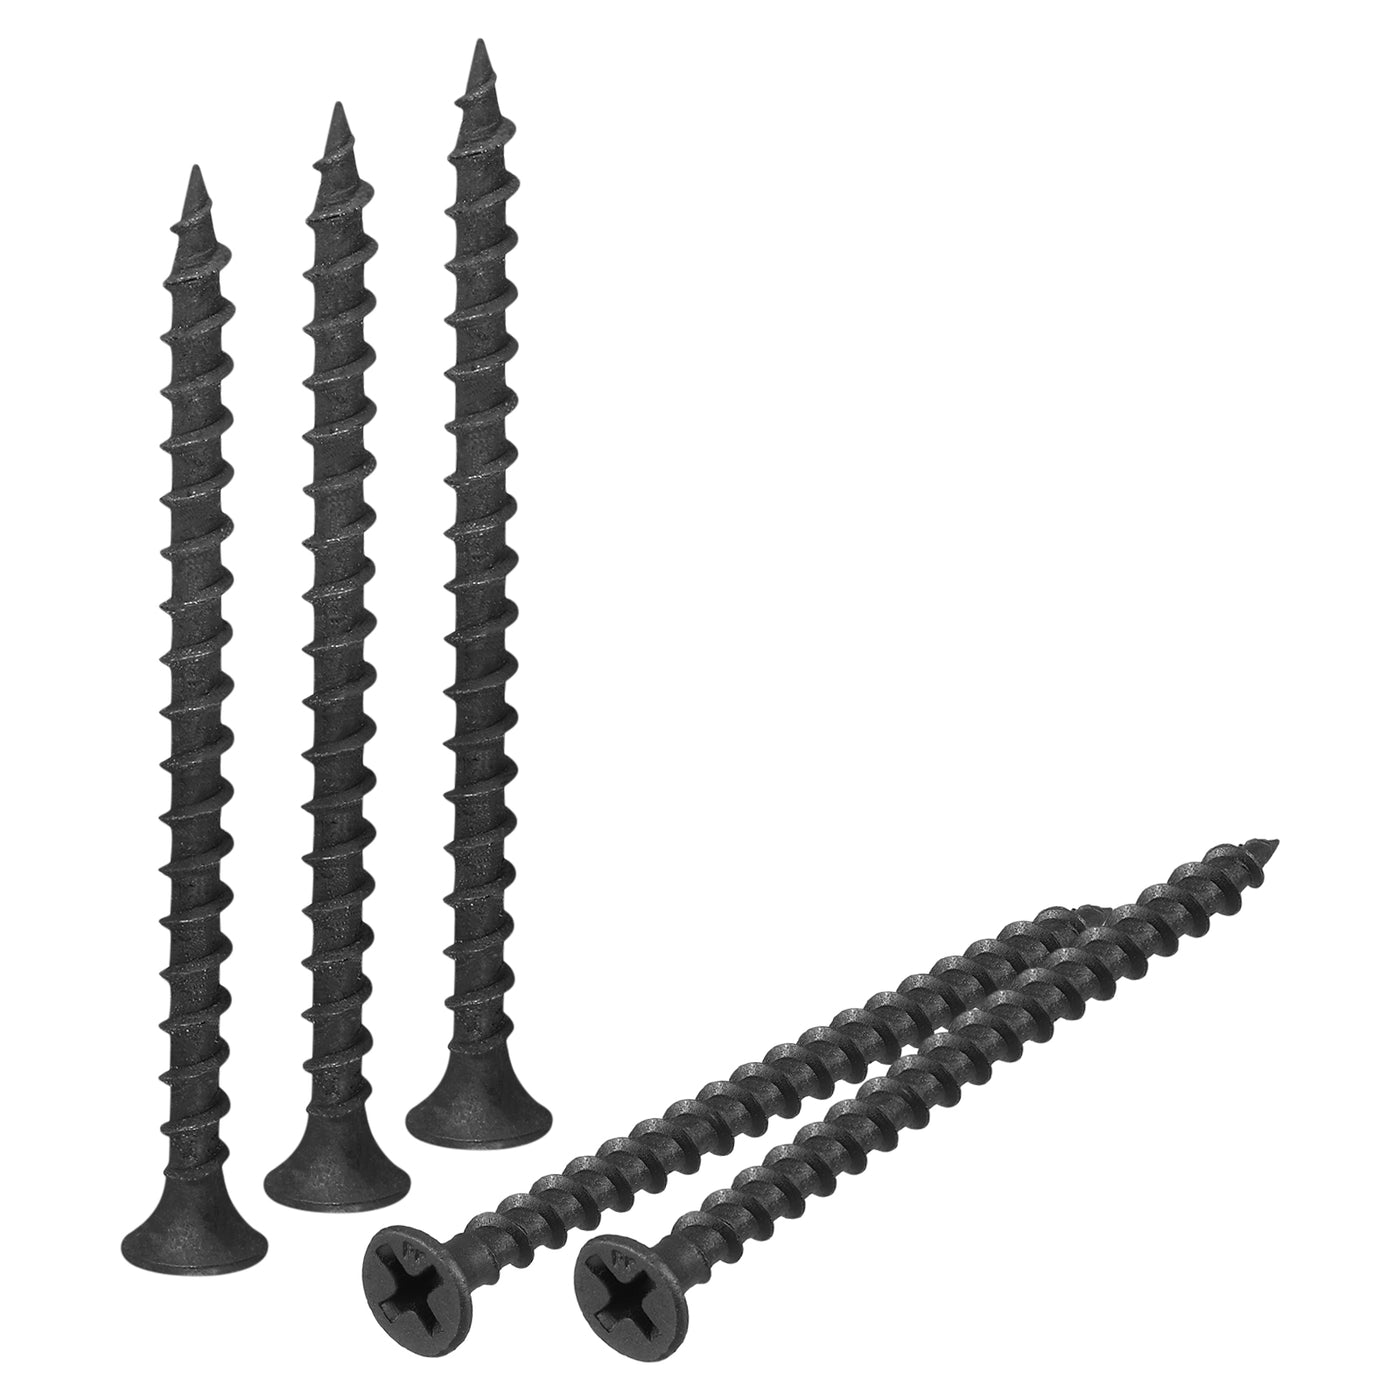 uxcell Uxcell M3.8x60mm 150pcs Phillips Drive Wood Screws, Carbon Steel Self Tapping Screws